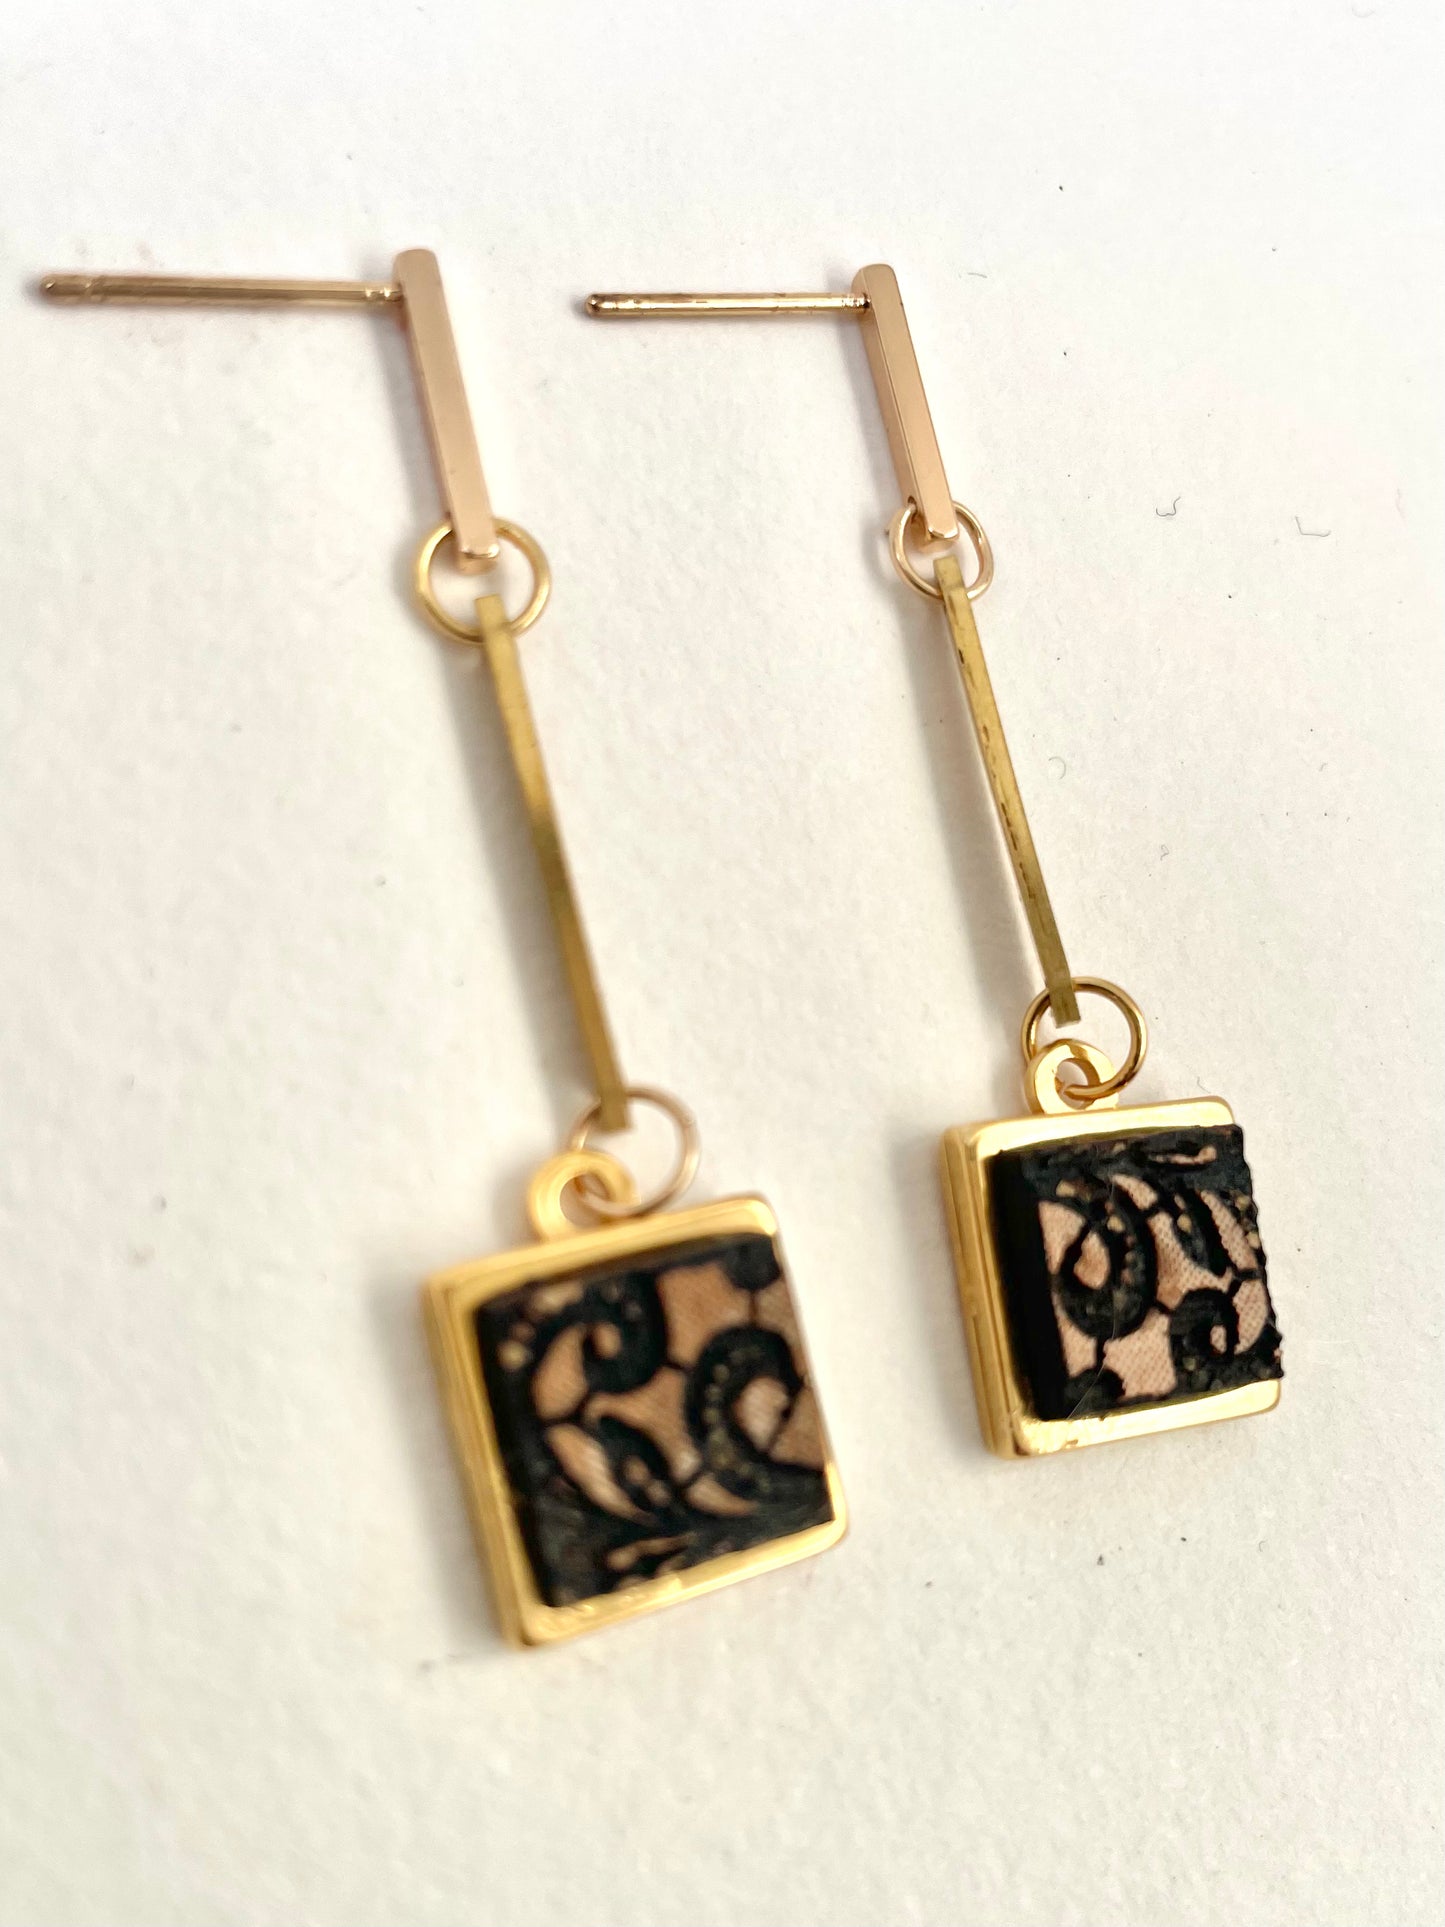 Wood with lace pattern set into gold plated bar 7cm x 1cm x 0.4